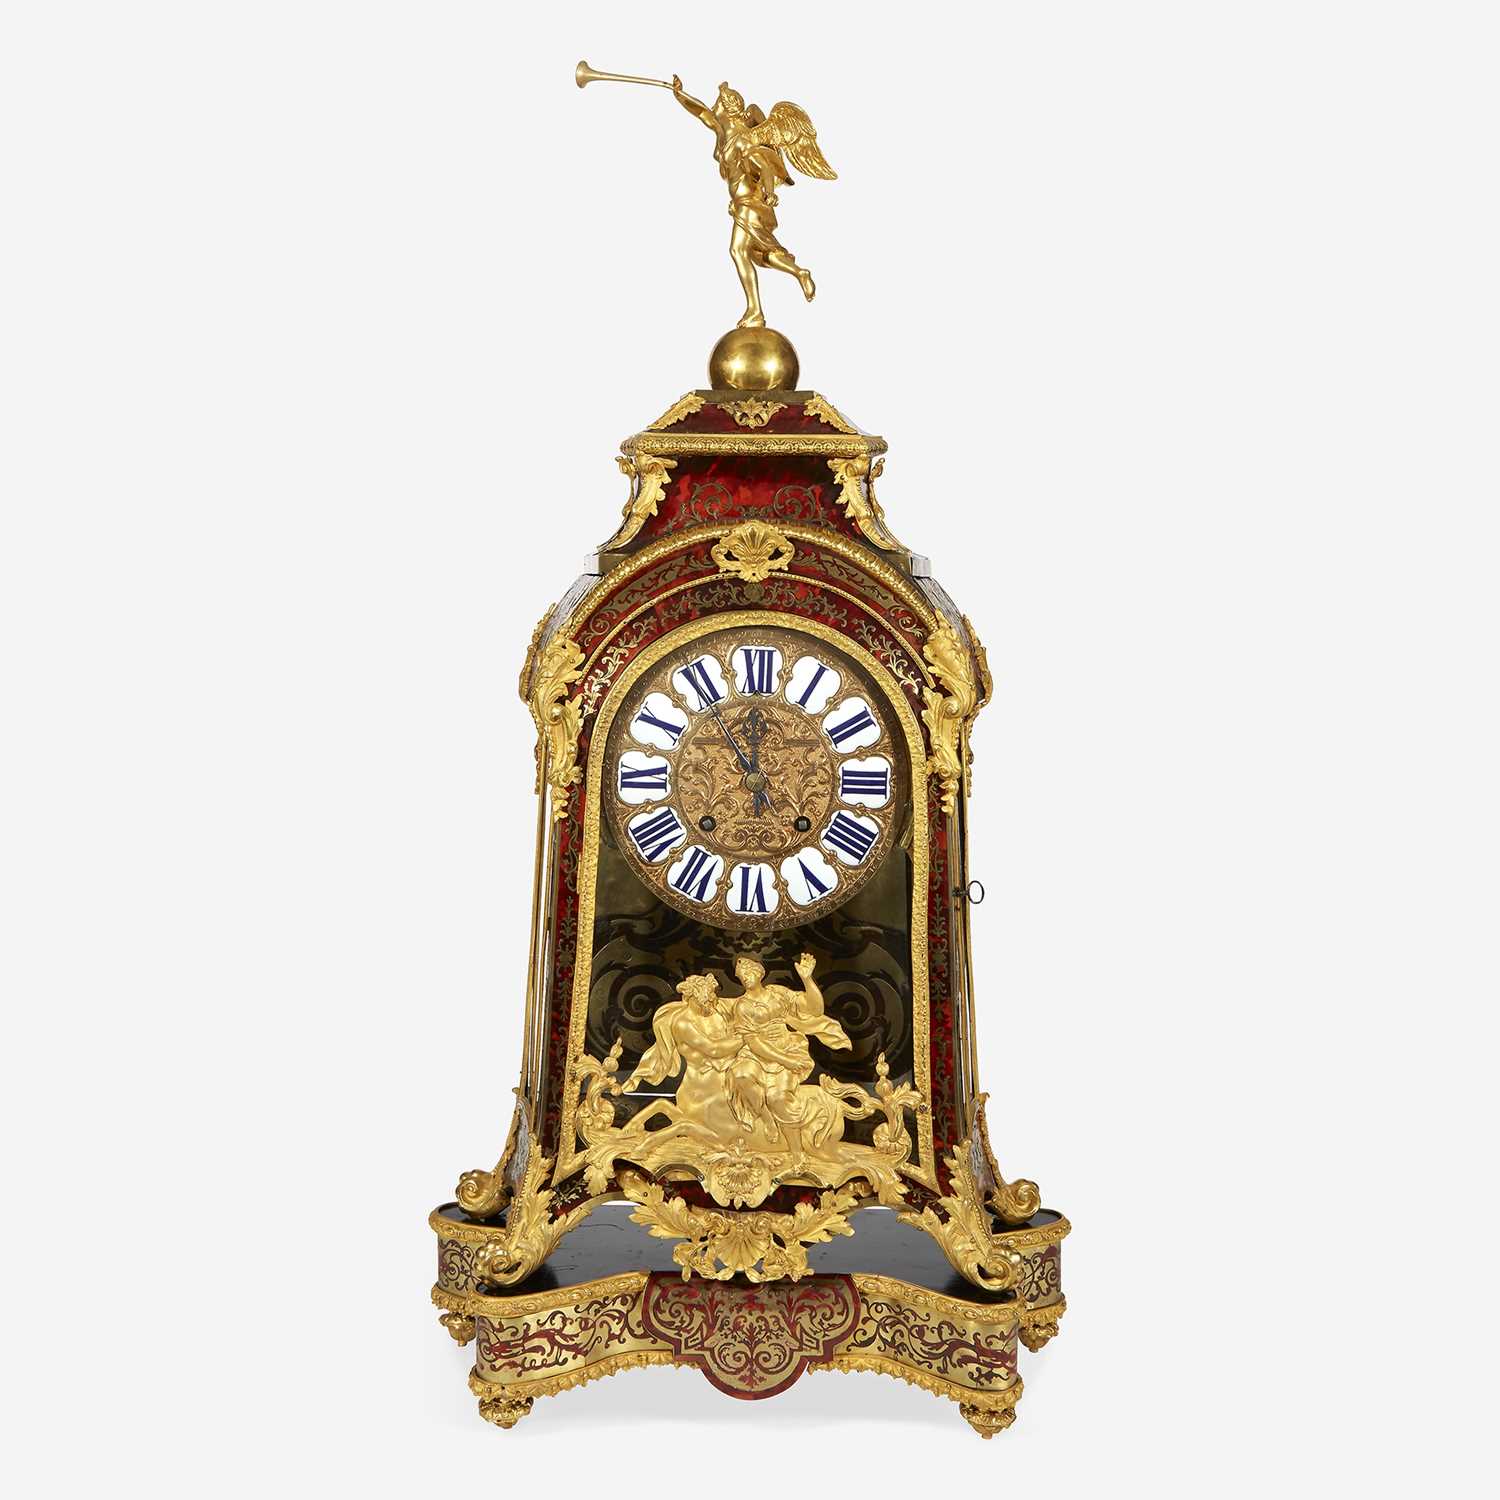 Lot 19 - A Louis XIV Ormolu-Mounted Brass-Inlaid Red Tortoiseshell Boulle Marquetry Mantel Clock on Stand*